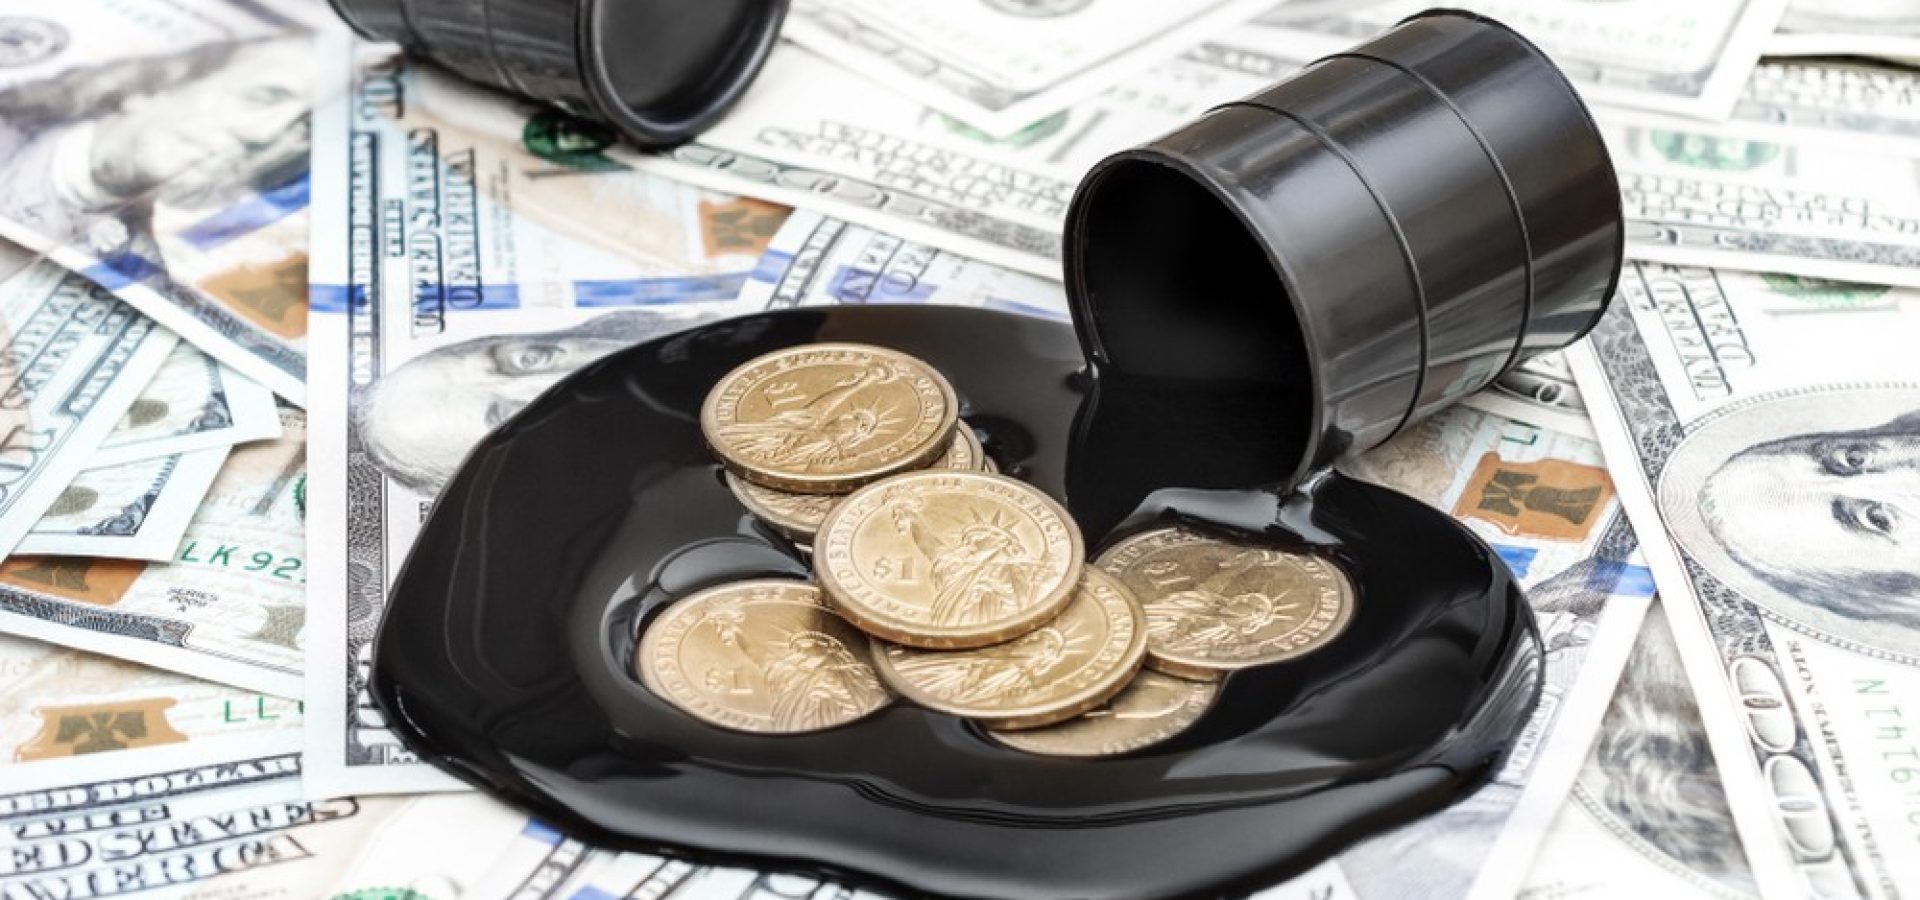 Wibest – Oil and petroleum: Oil barrel spilling crude over US dollar coins and bills.